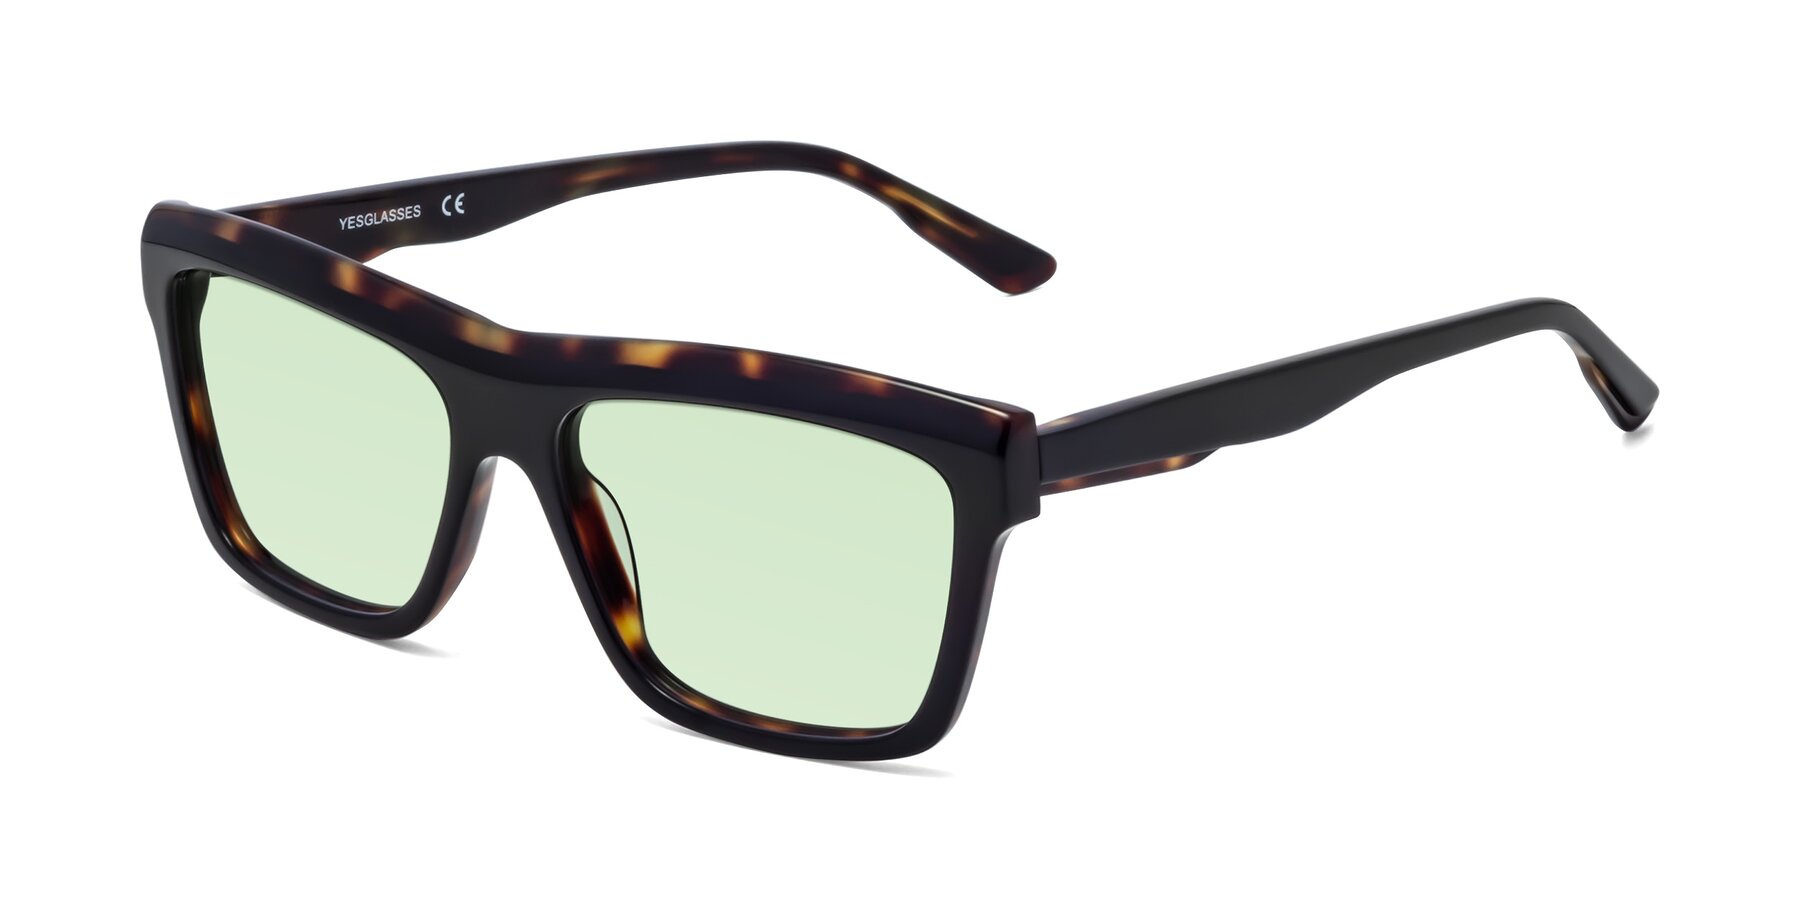 Angle of 1481 in Tortoise with Light Green Tinted Lenses